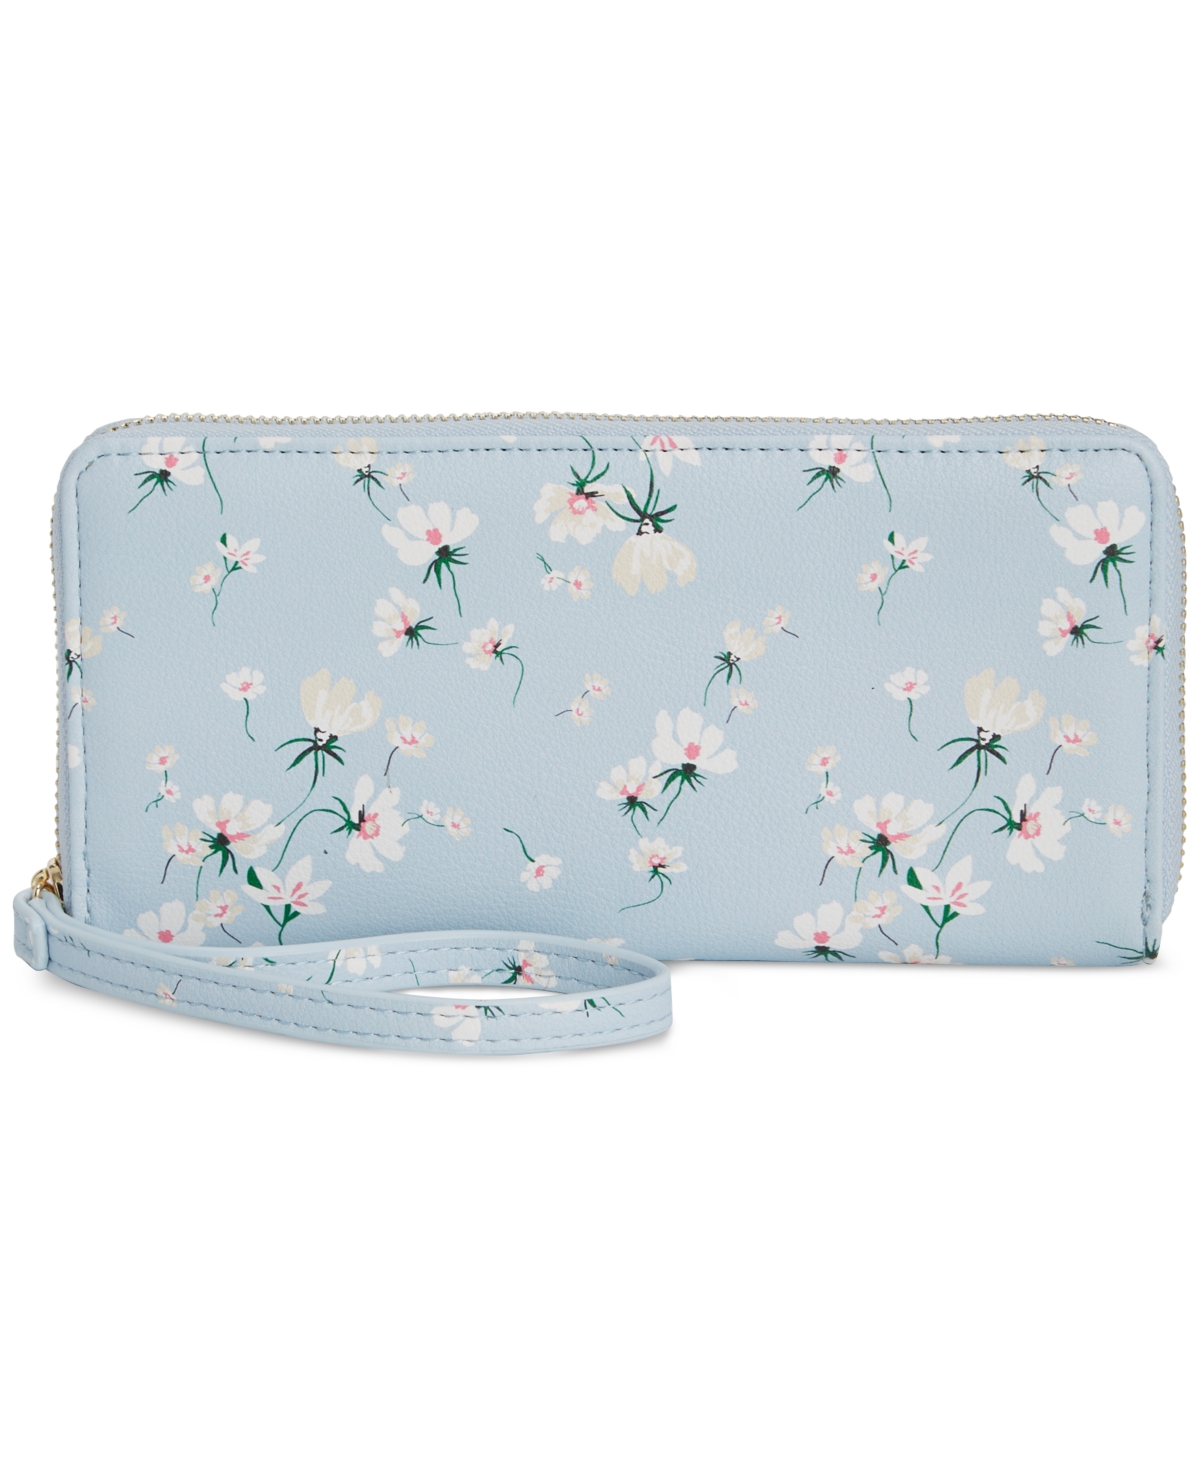 Angii Zip Around Printed Wallet, Created for Macy's - Lemonlime/white